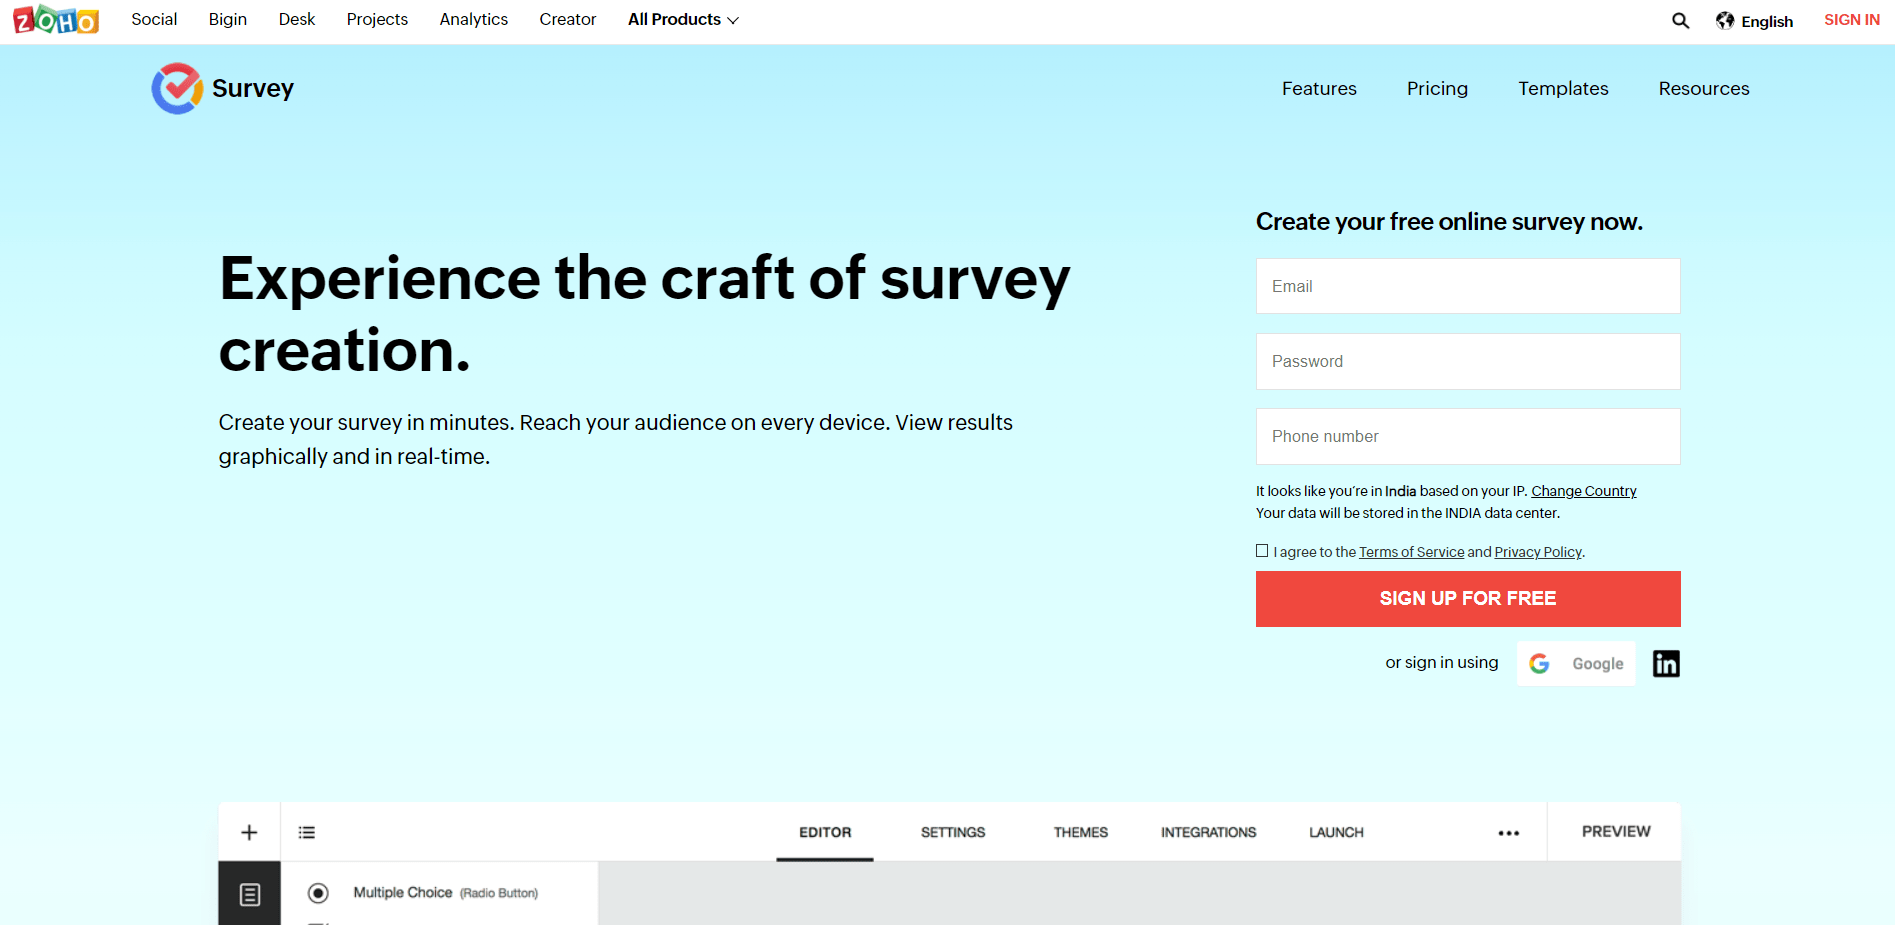 the image shows the home page of Zoho Survey- one of the best survey tools online. 